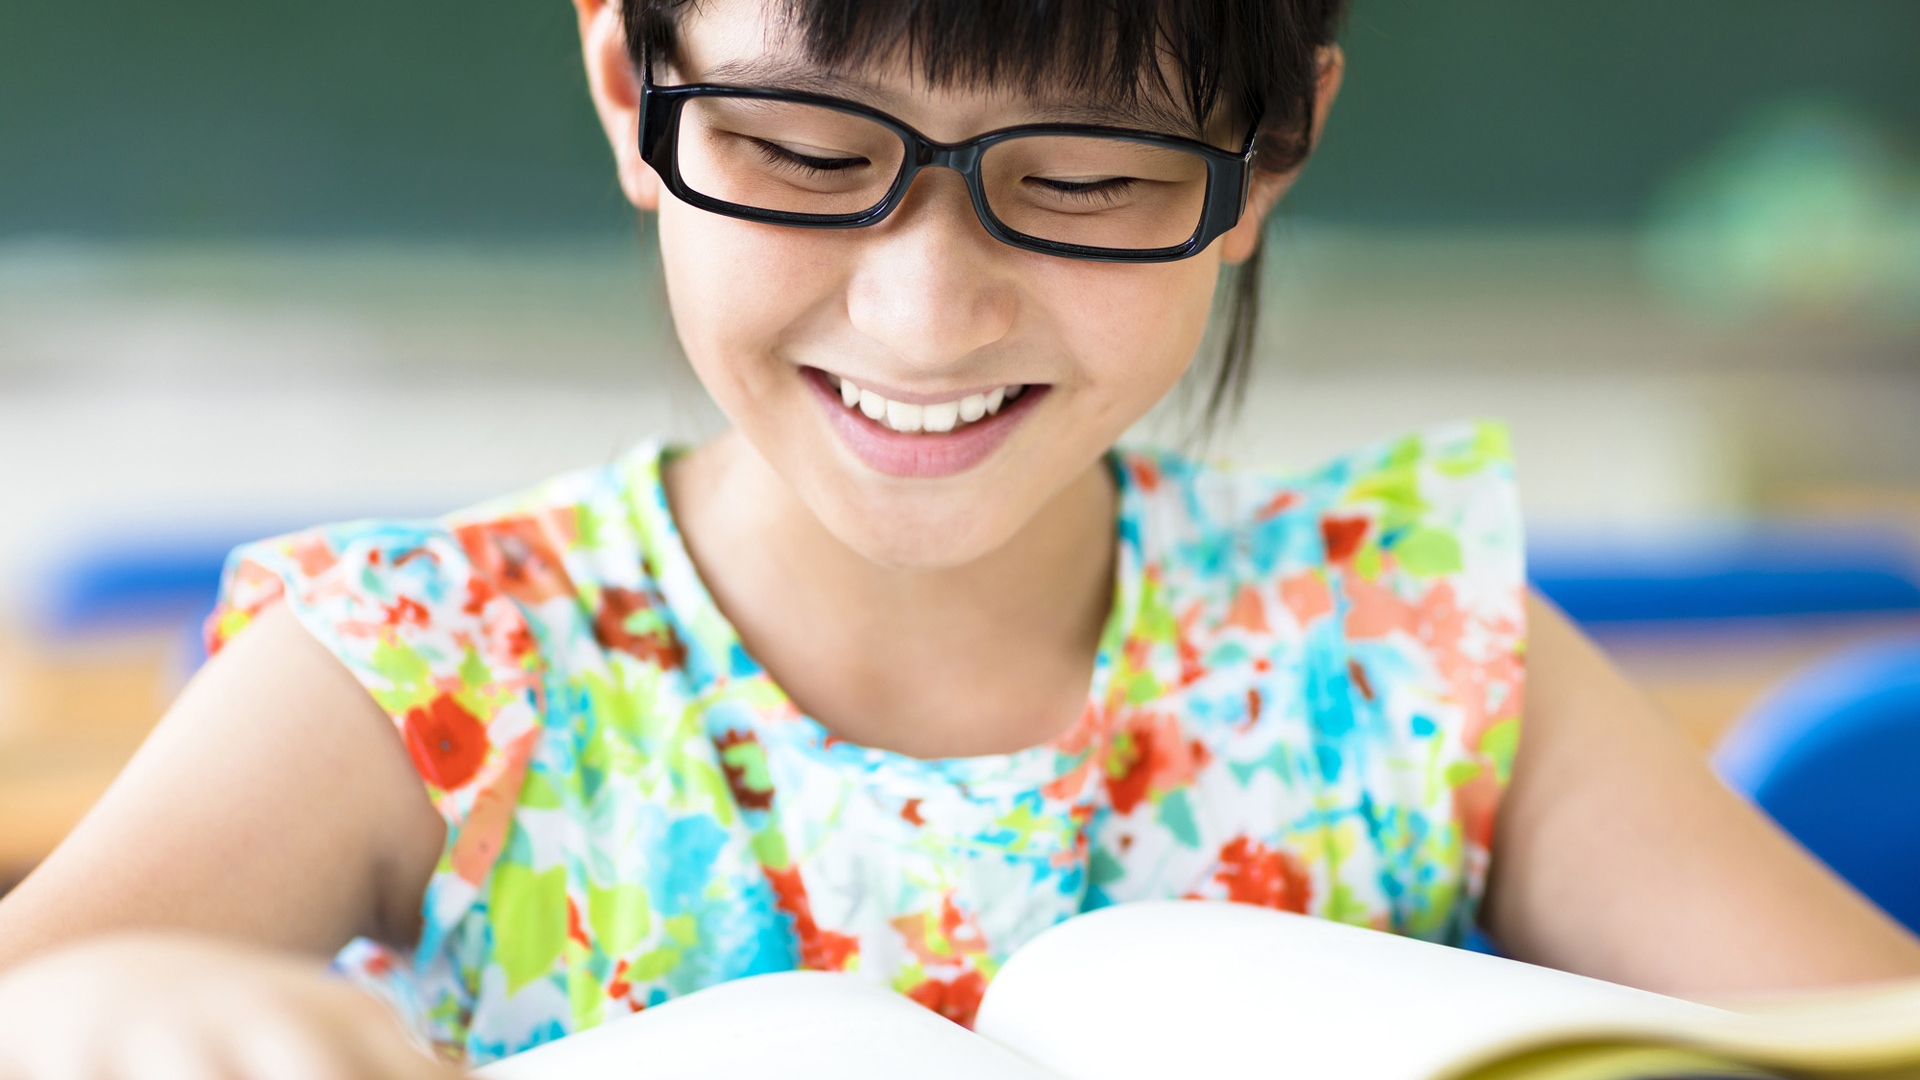 If your child has blurred vision, it could be a warning sign of myopia (short-sightedness).